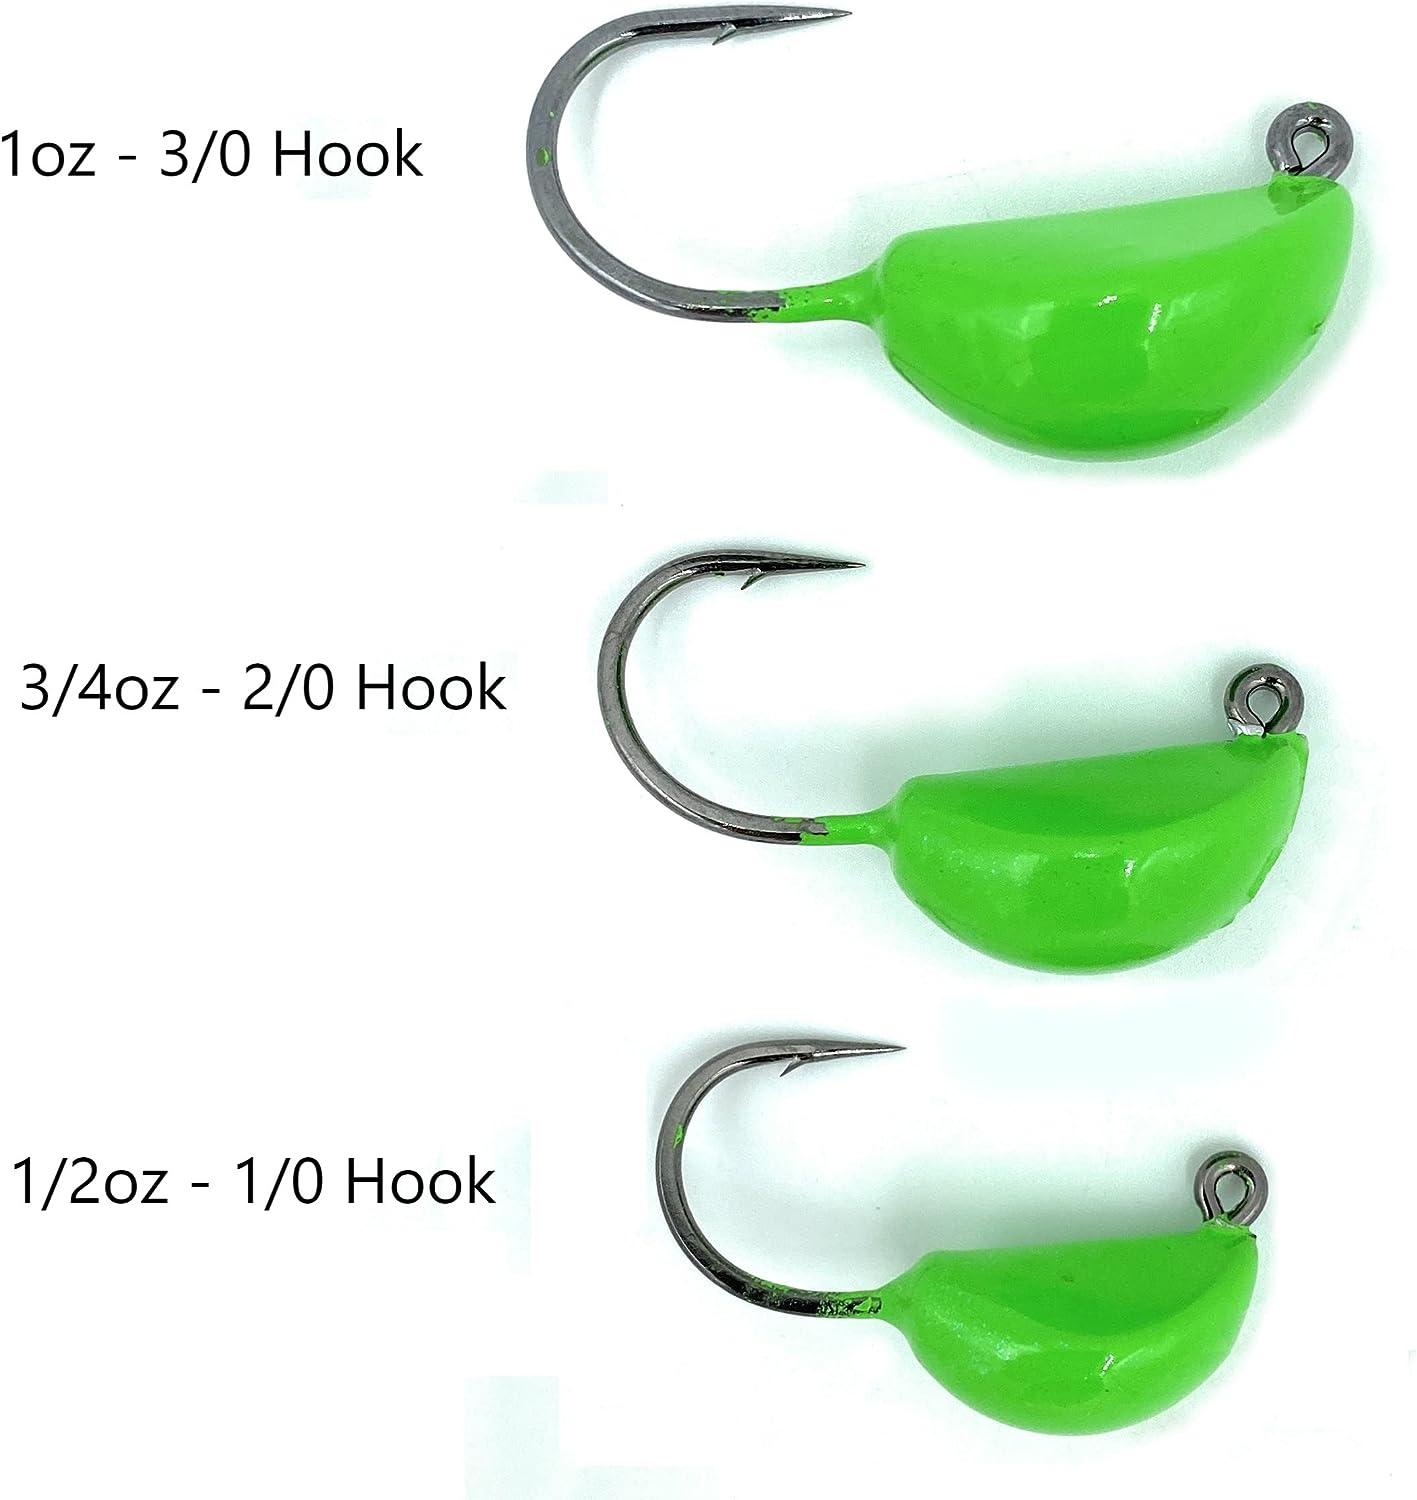 Sheepshead Jig, 2 Pack, Standup Style Jig, Saltwater Fishing Jig, Ultra  Tough Powder Coat Finish with 2X Hook, 1/2-2oz Sizes, Multiple Colors, Made  in The USA 1oz Orange Crab